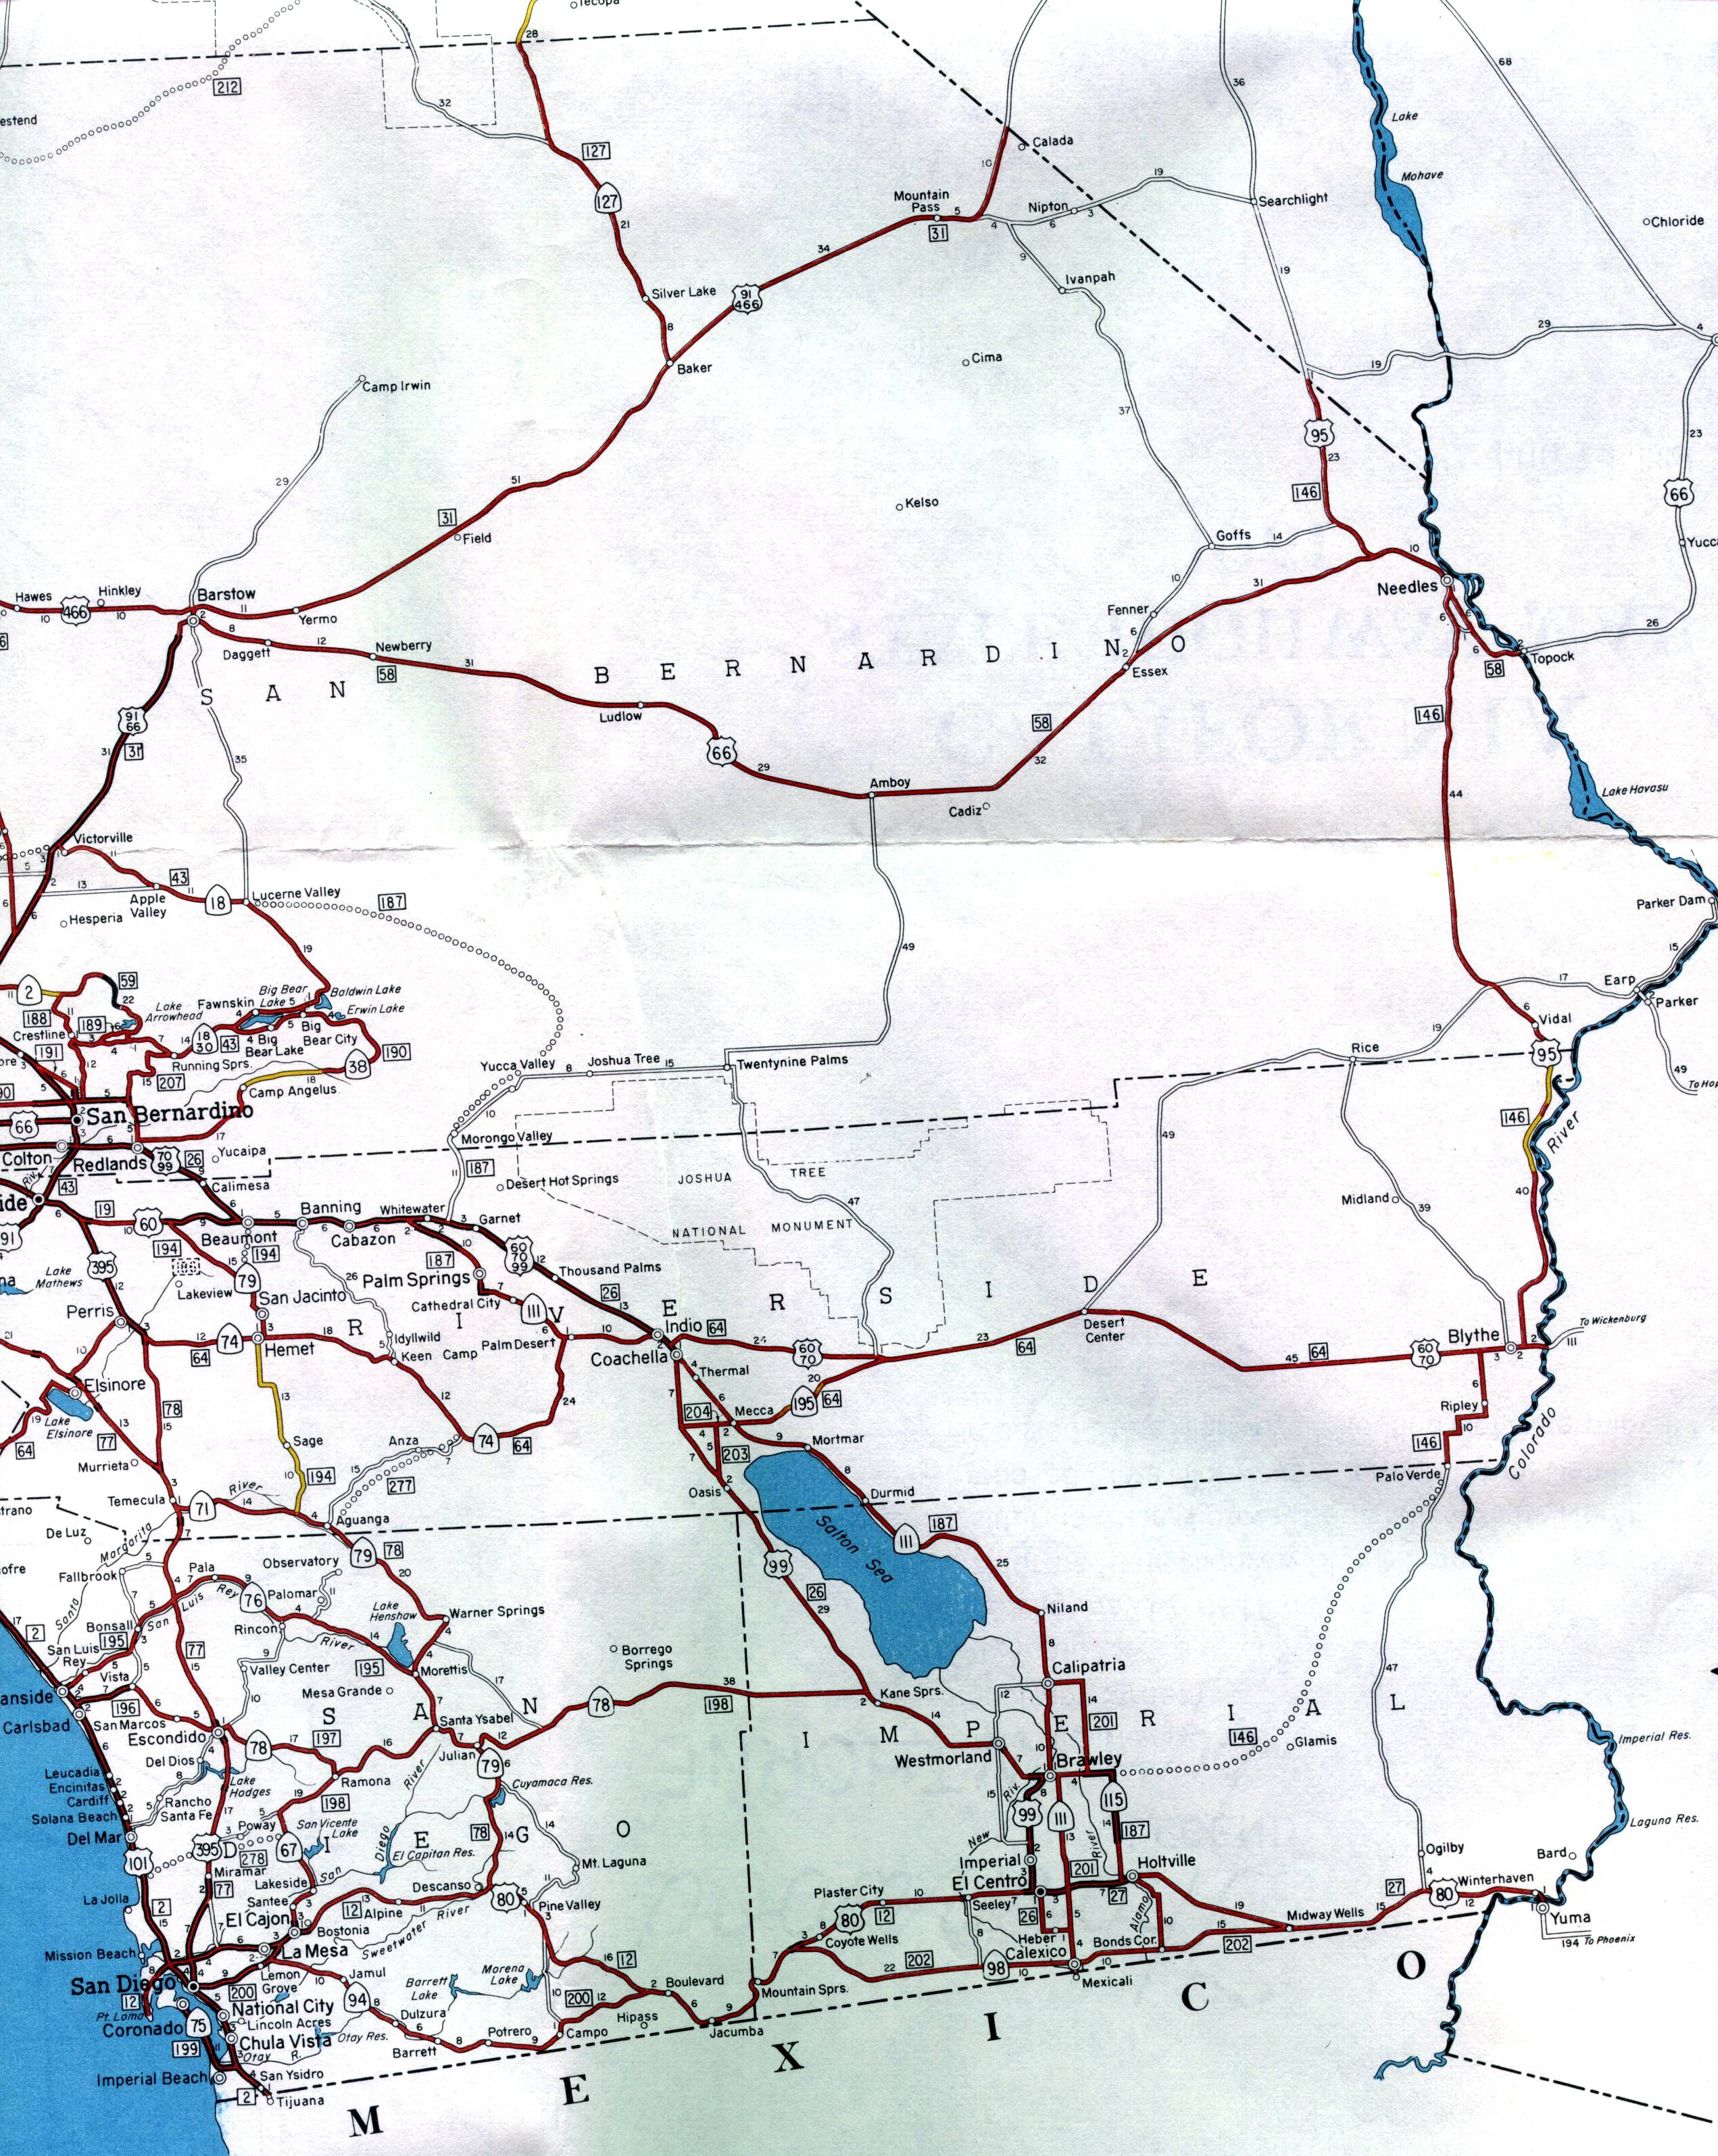 Southernmost region of California (1961 official map)